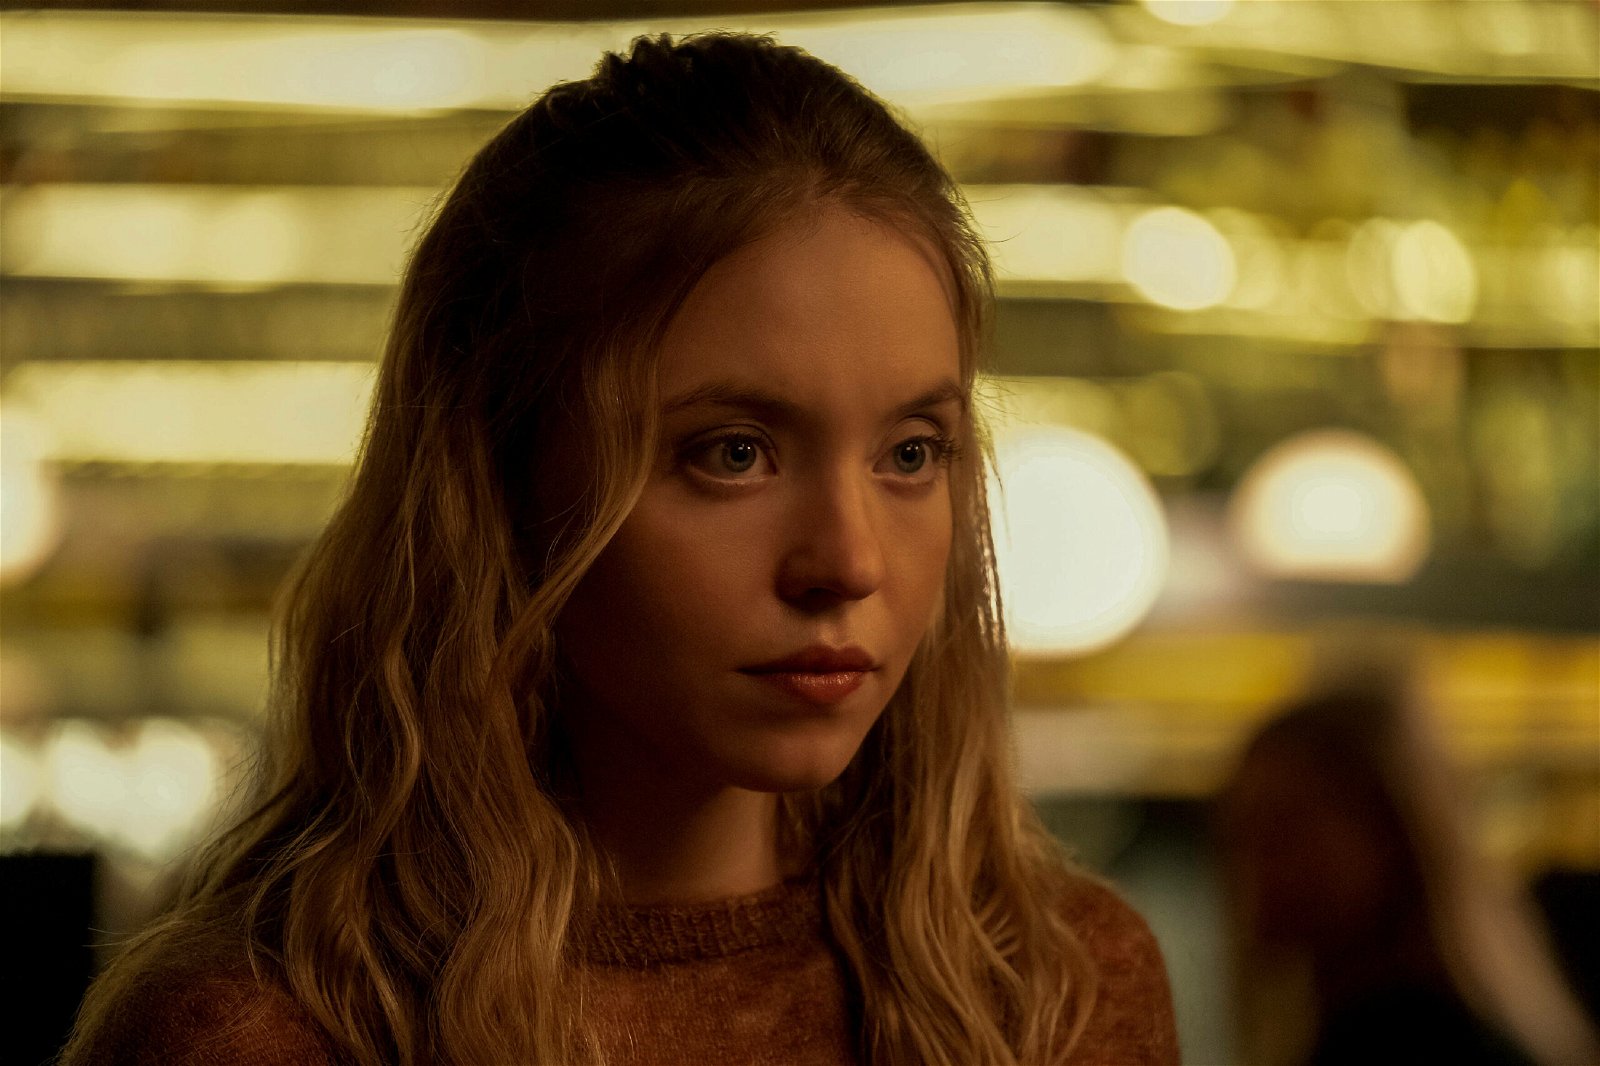 Sydney Sweeney couldn't buy a house for her mother